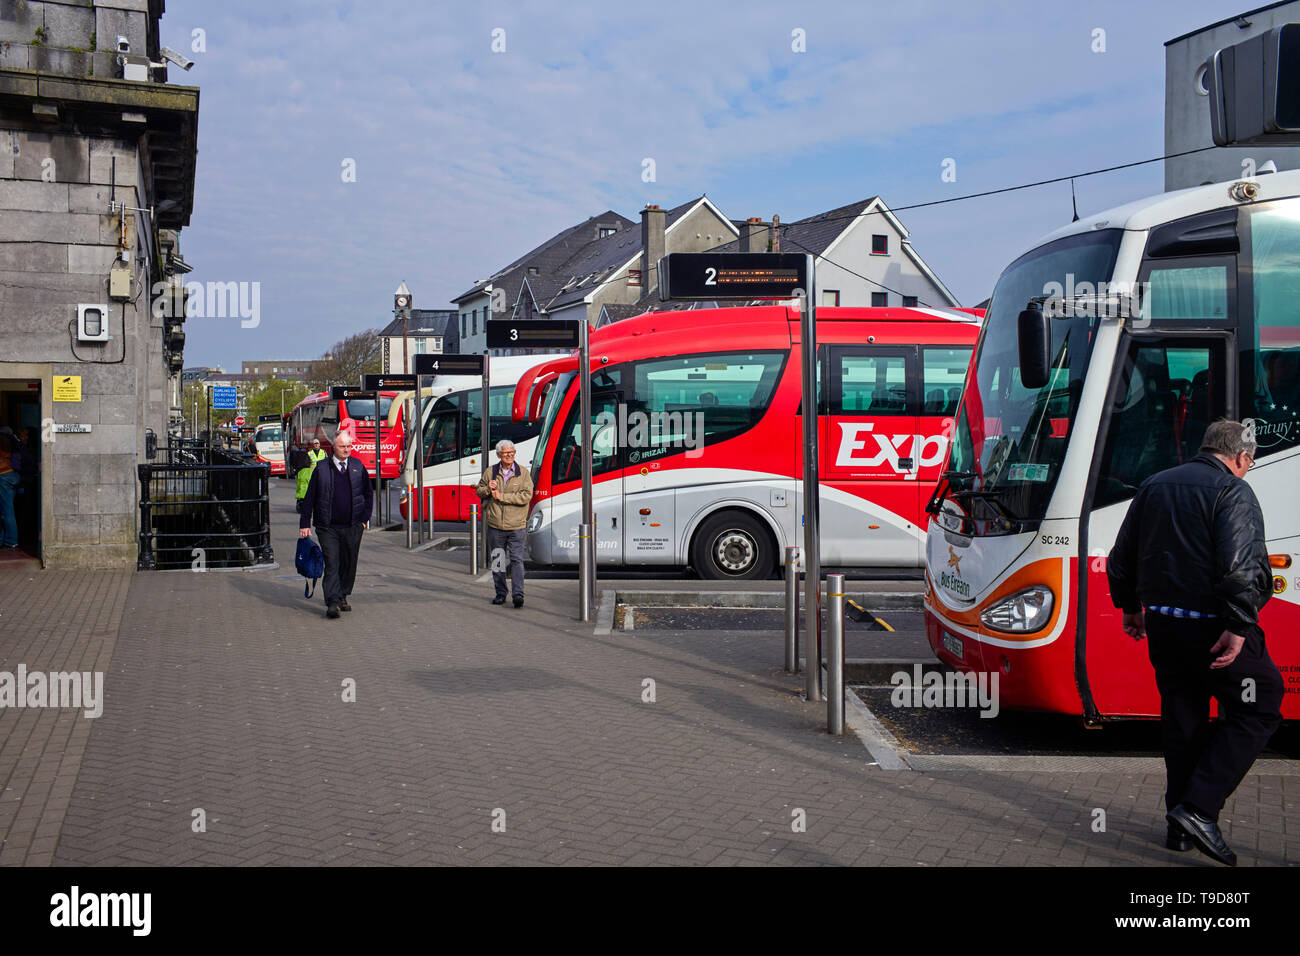 The bus station transport hub in Galway, Ireland Stock Photo